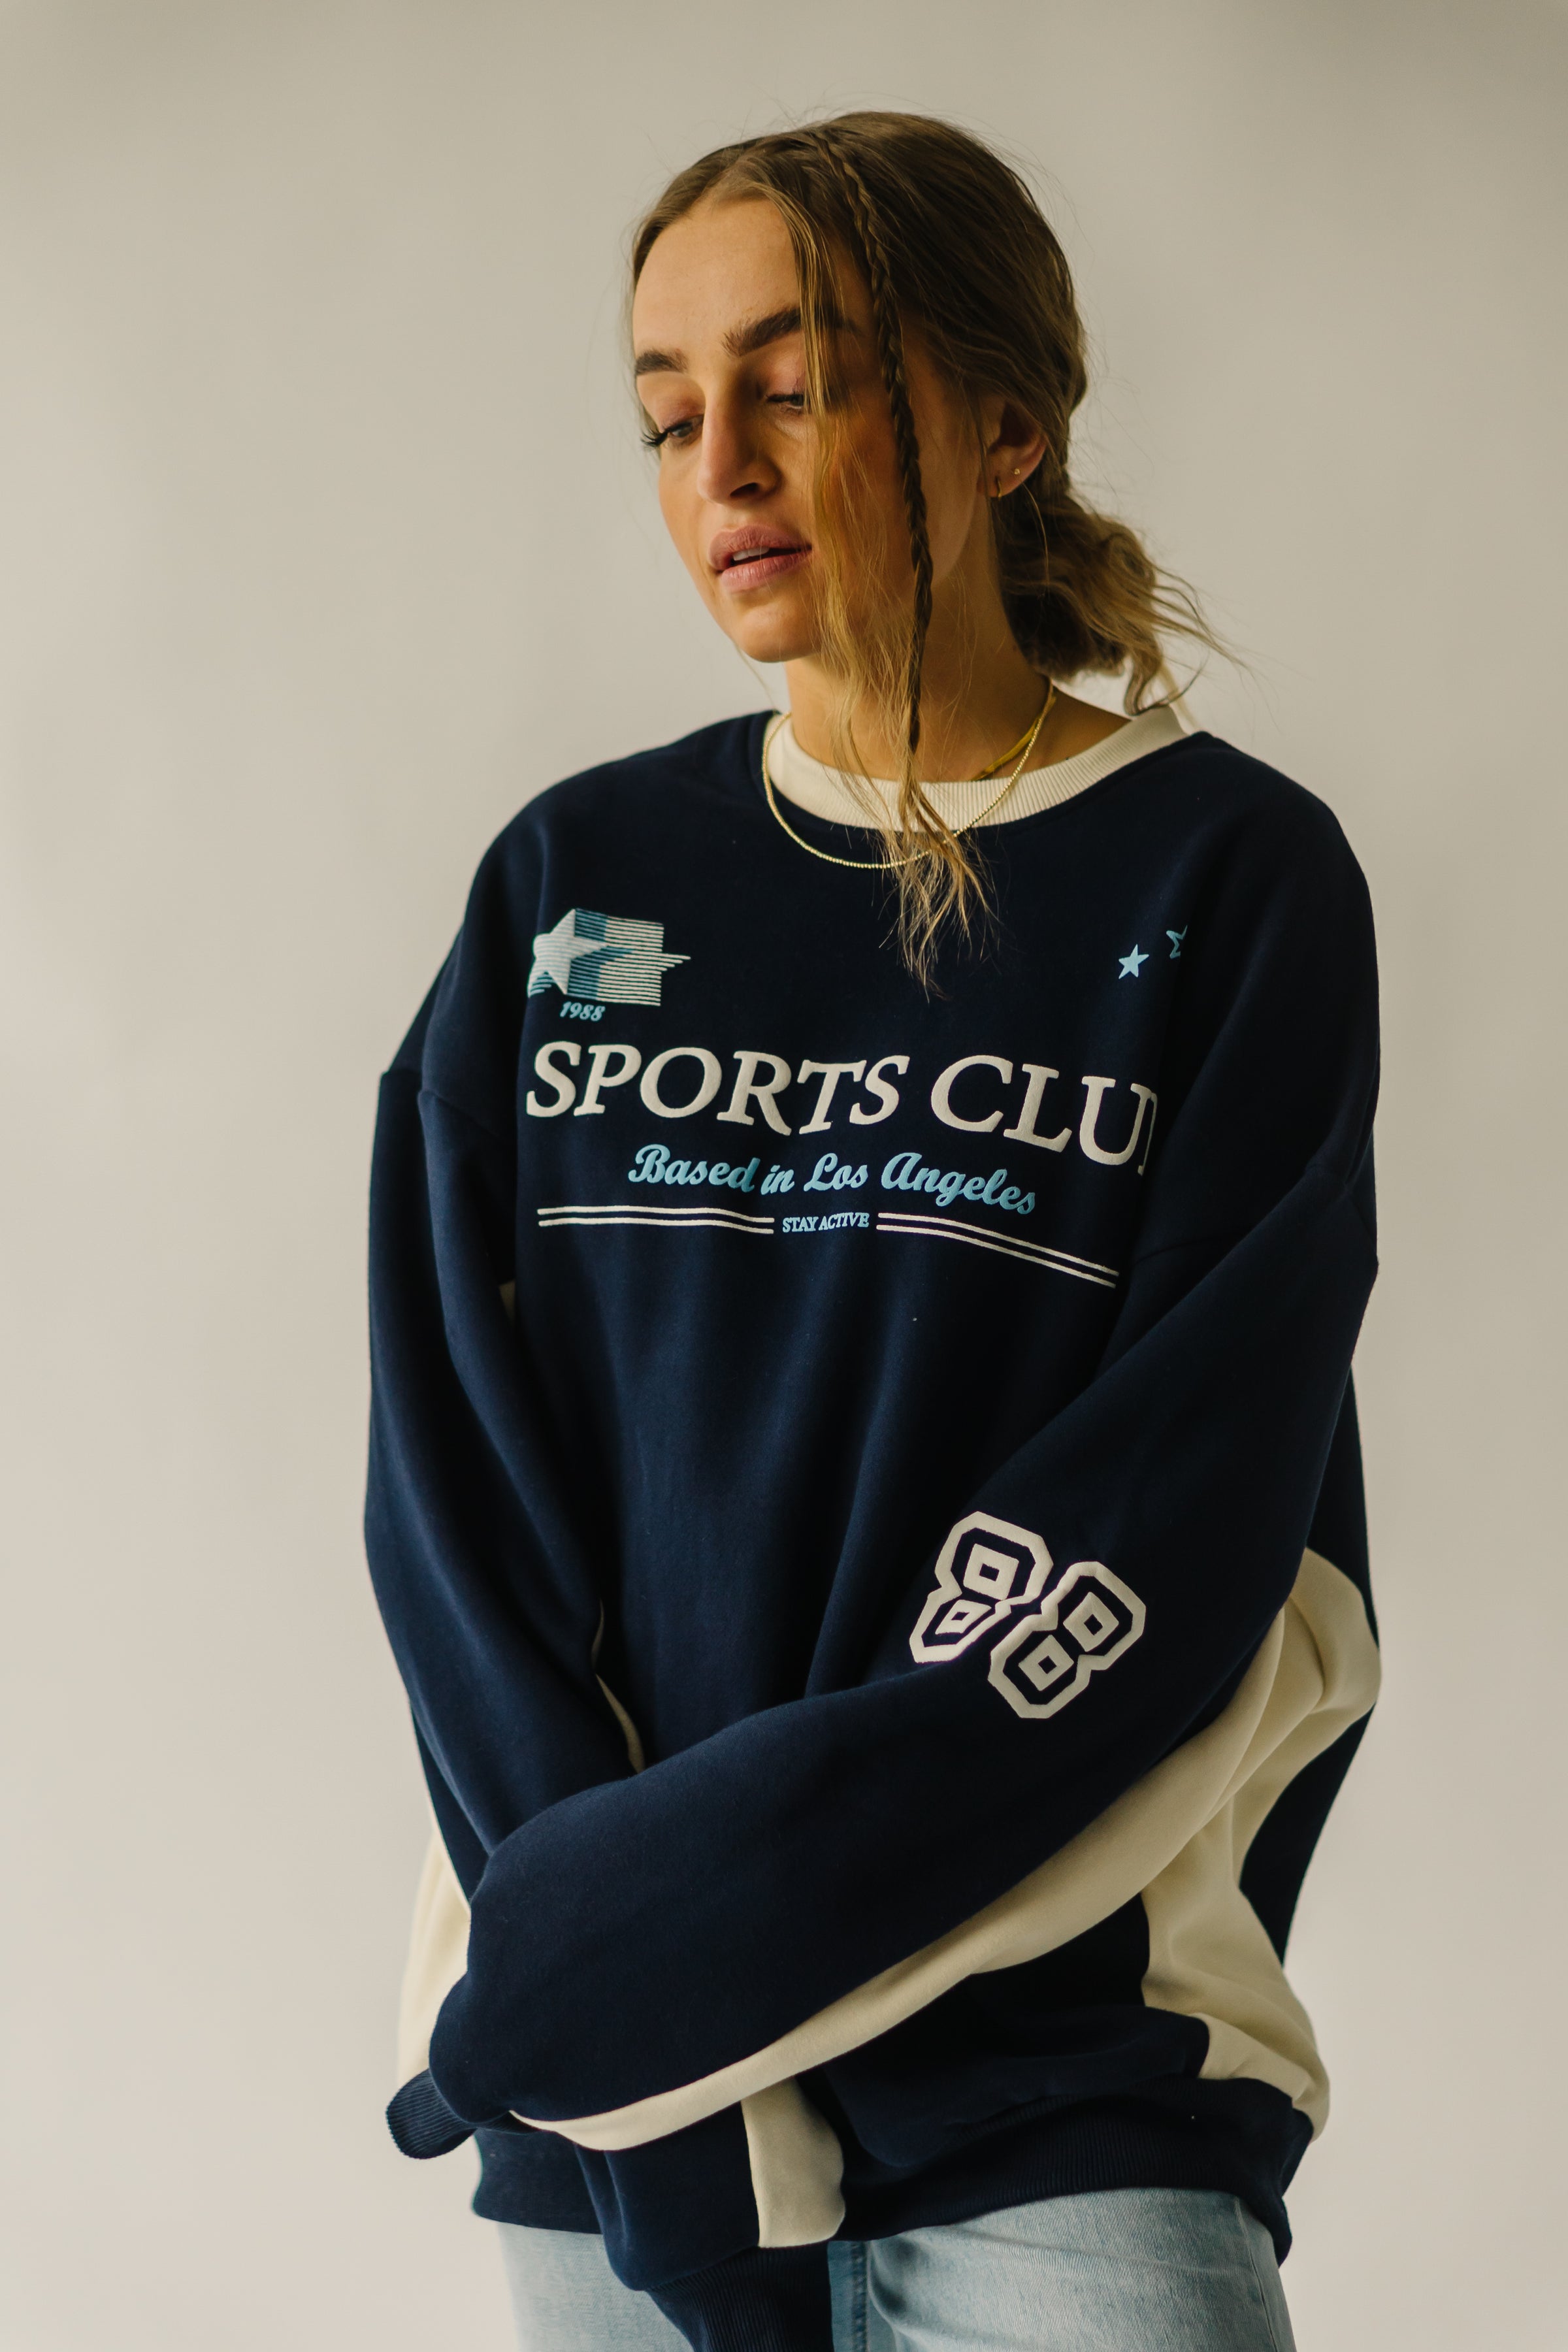 & Pullover Sports Scoot Navy in + – Piper Graphic Club Cream The